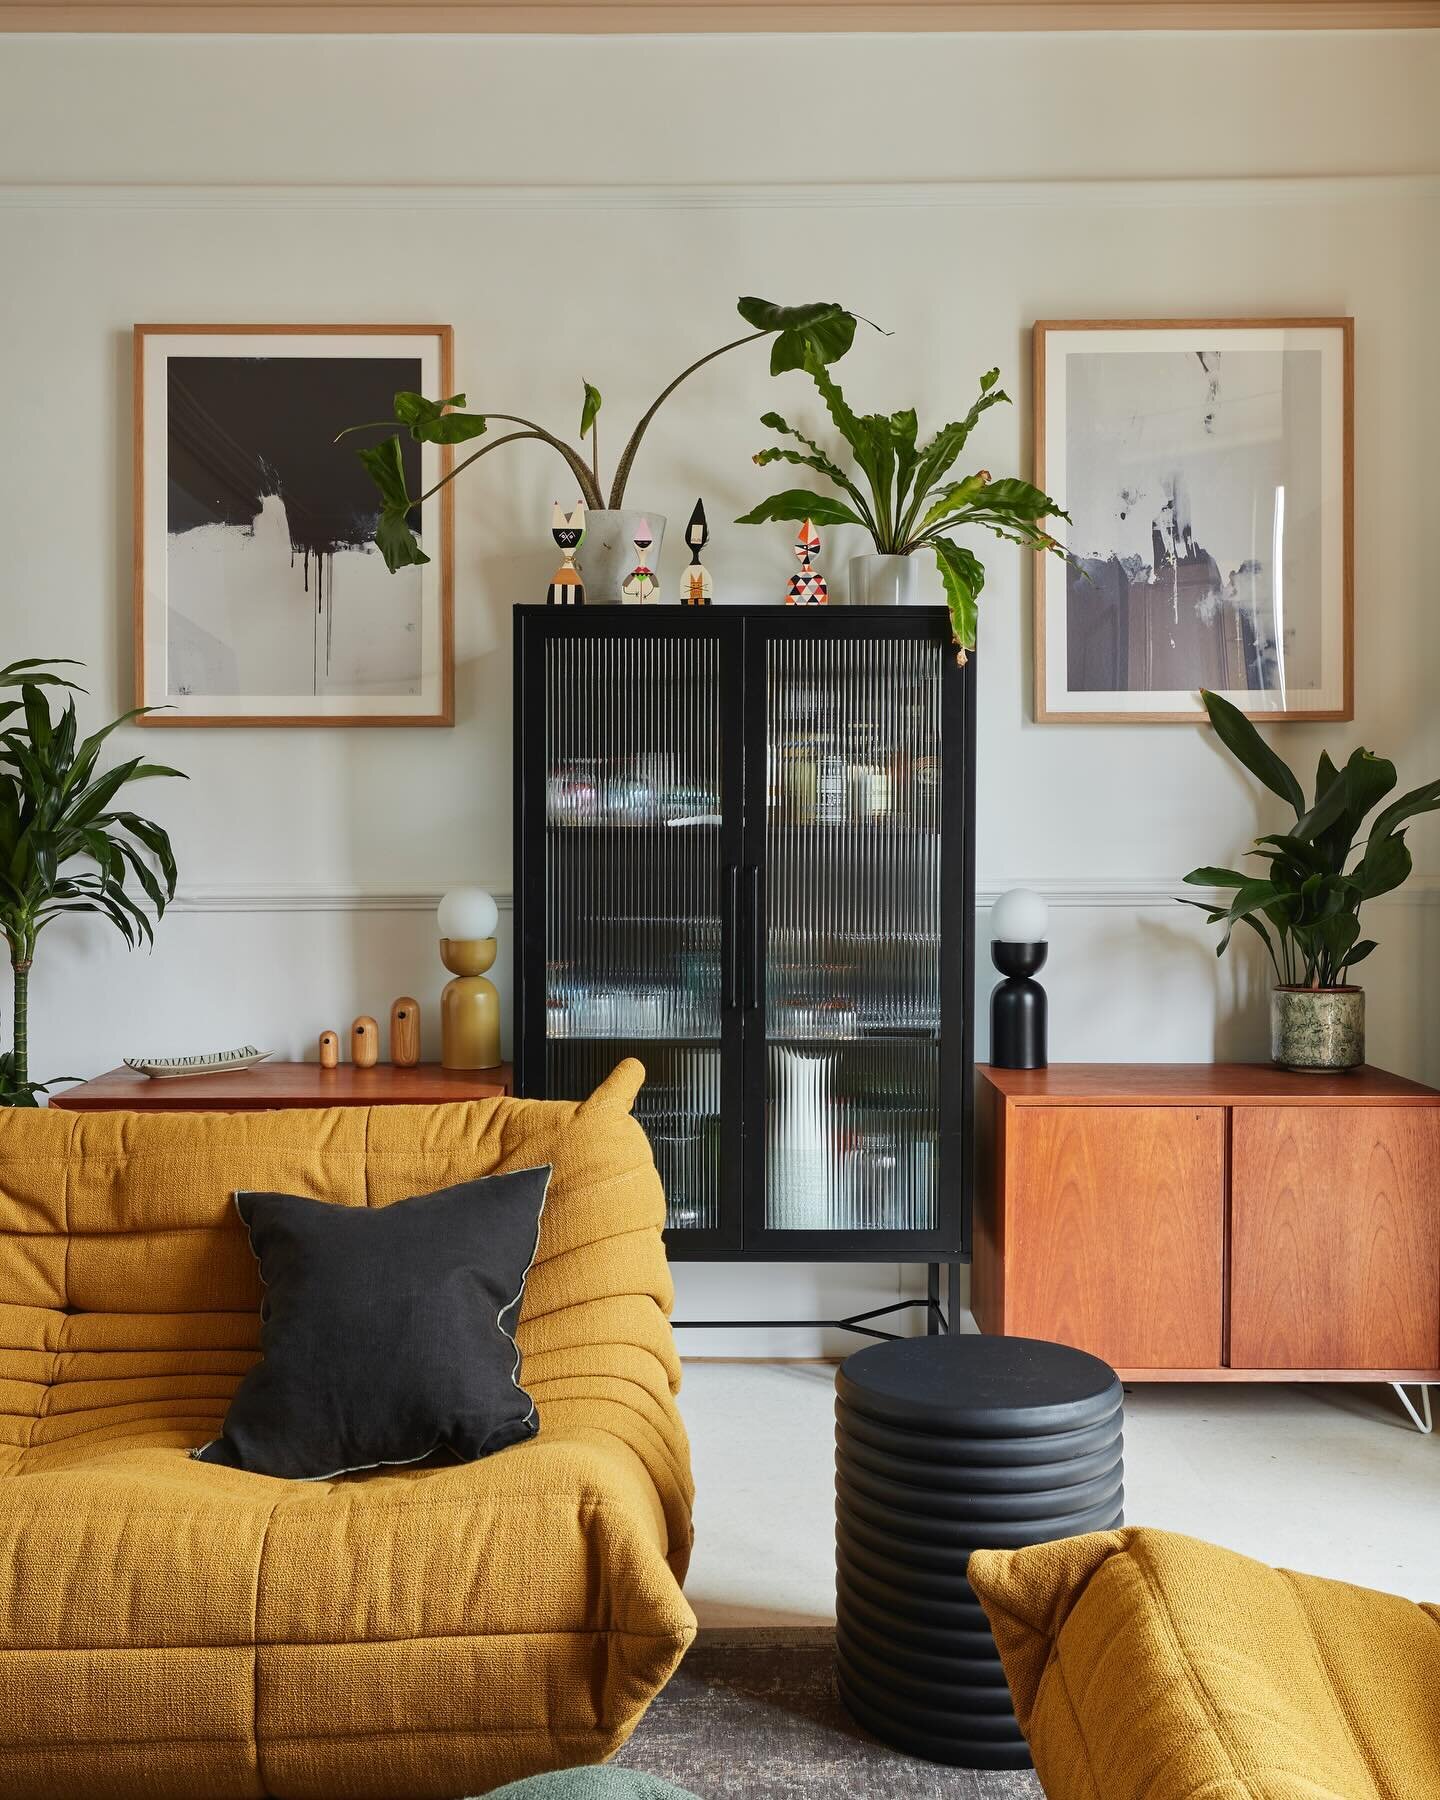 Mellow mustard and a generous shake of black to bring it together. 

Curves and roundness, texture and subtle pattern make this an interesting yet calm and comfortable space to be in. 

A mix of vintage and new, greenery and art combine to make this 